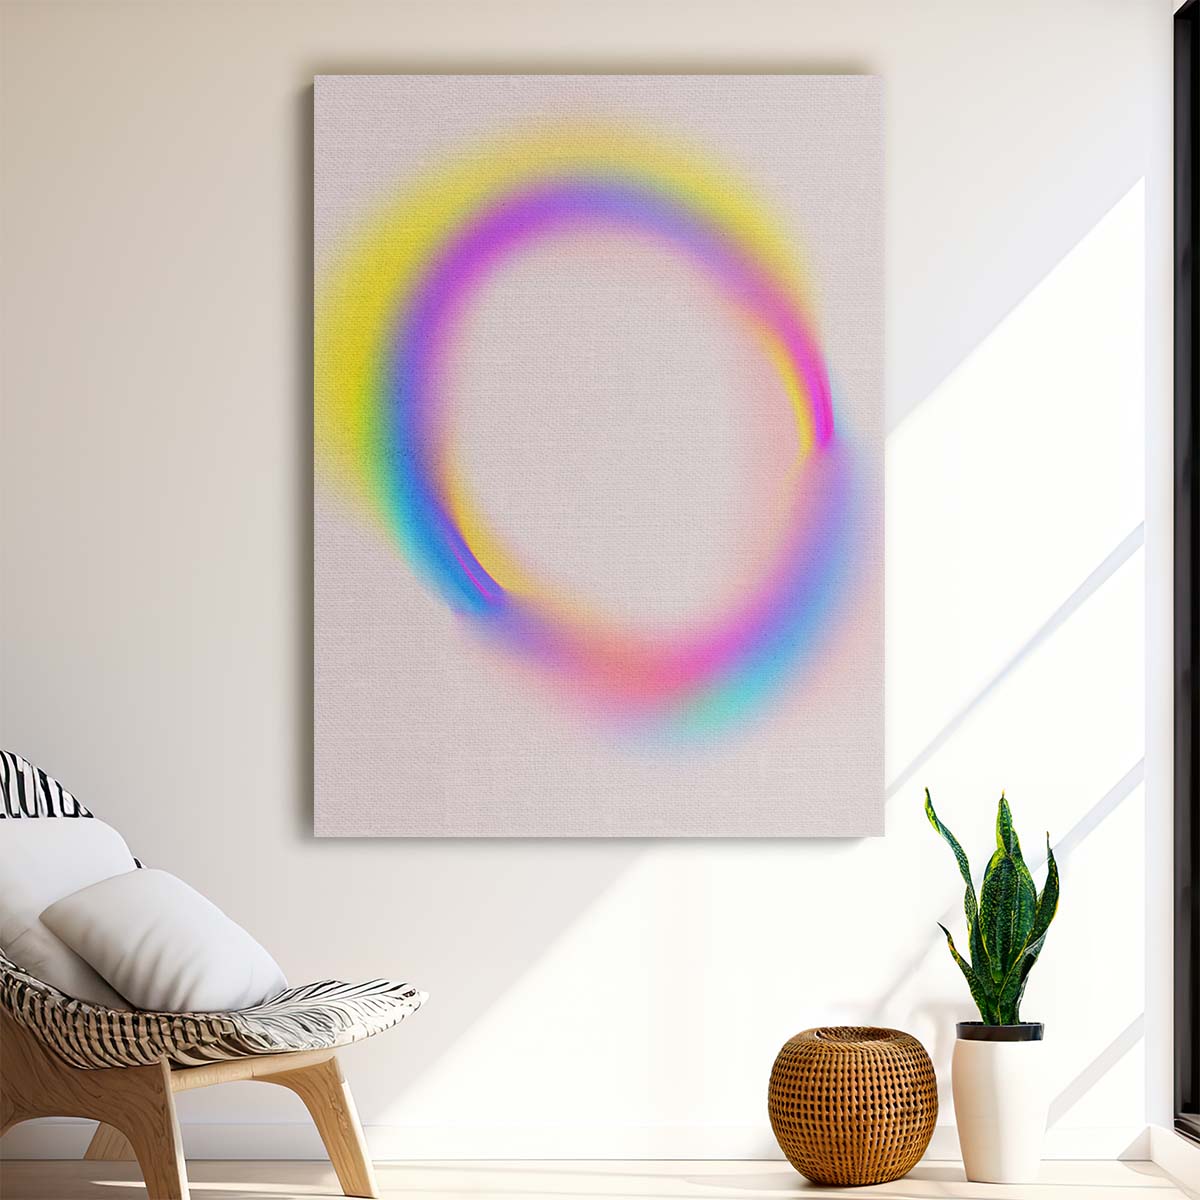 Abstract Geometric Rainbow Neon Circle Illustration by Treechild by Luxuriance Designs, made in USA